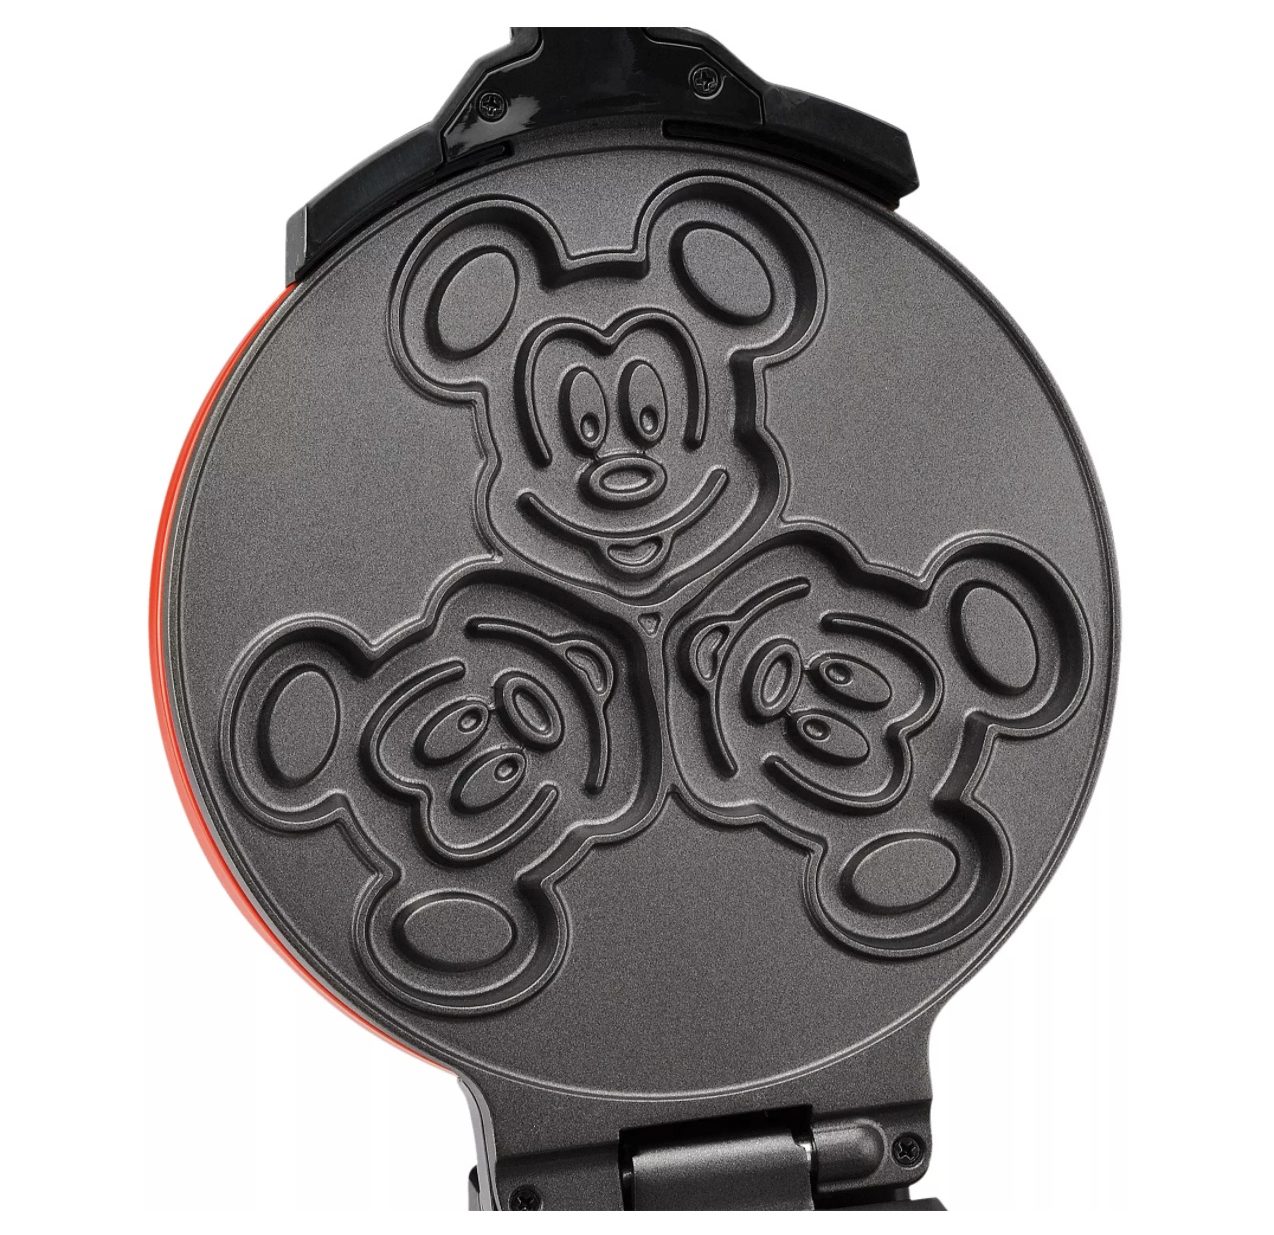 Make Mornings Magical With This Commemorative Mickey Mouse Waffle